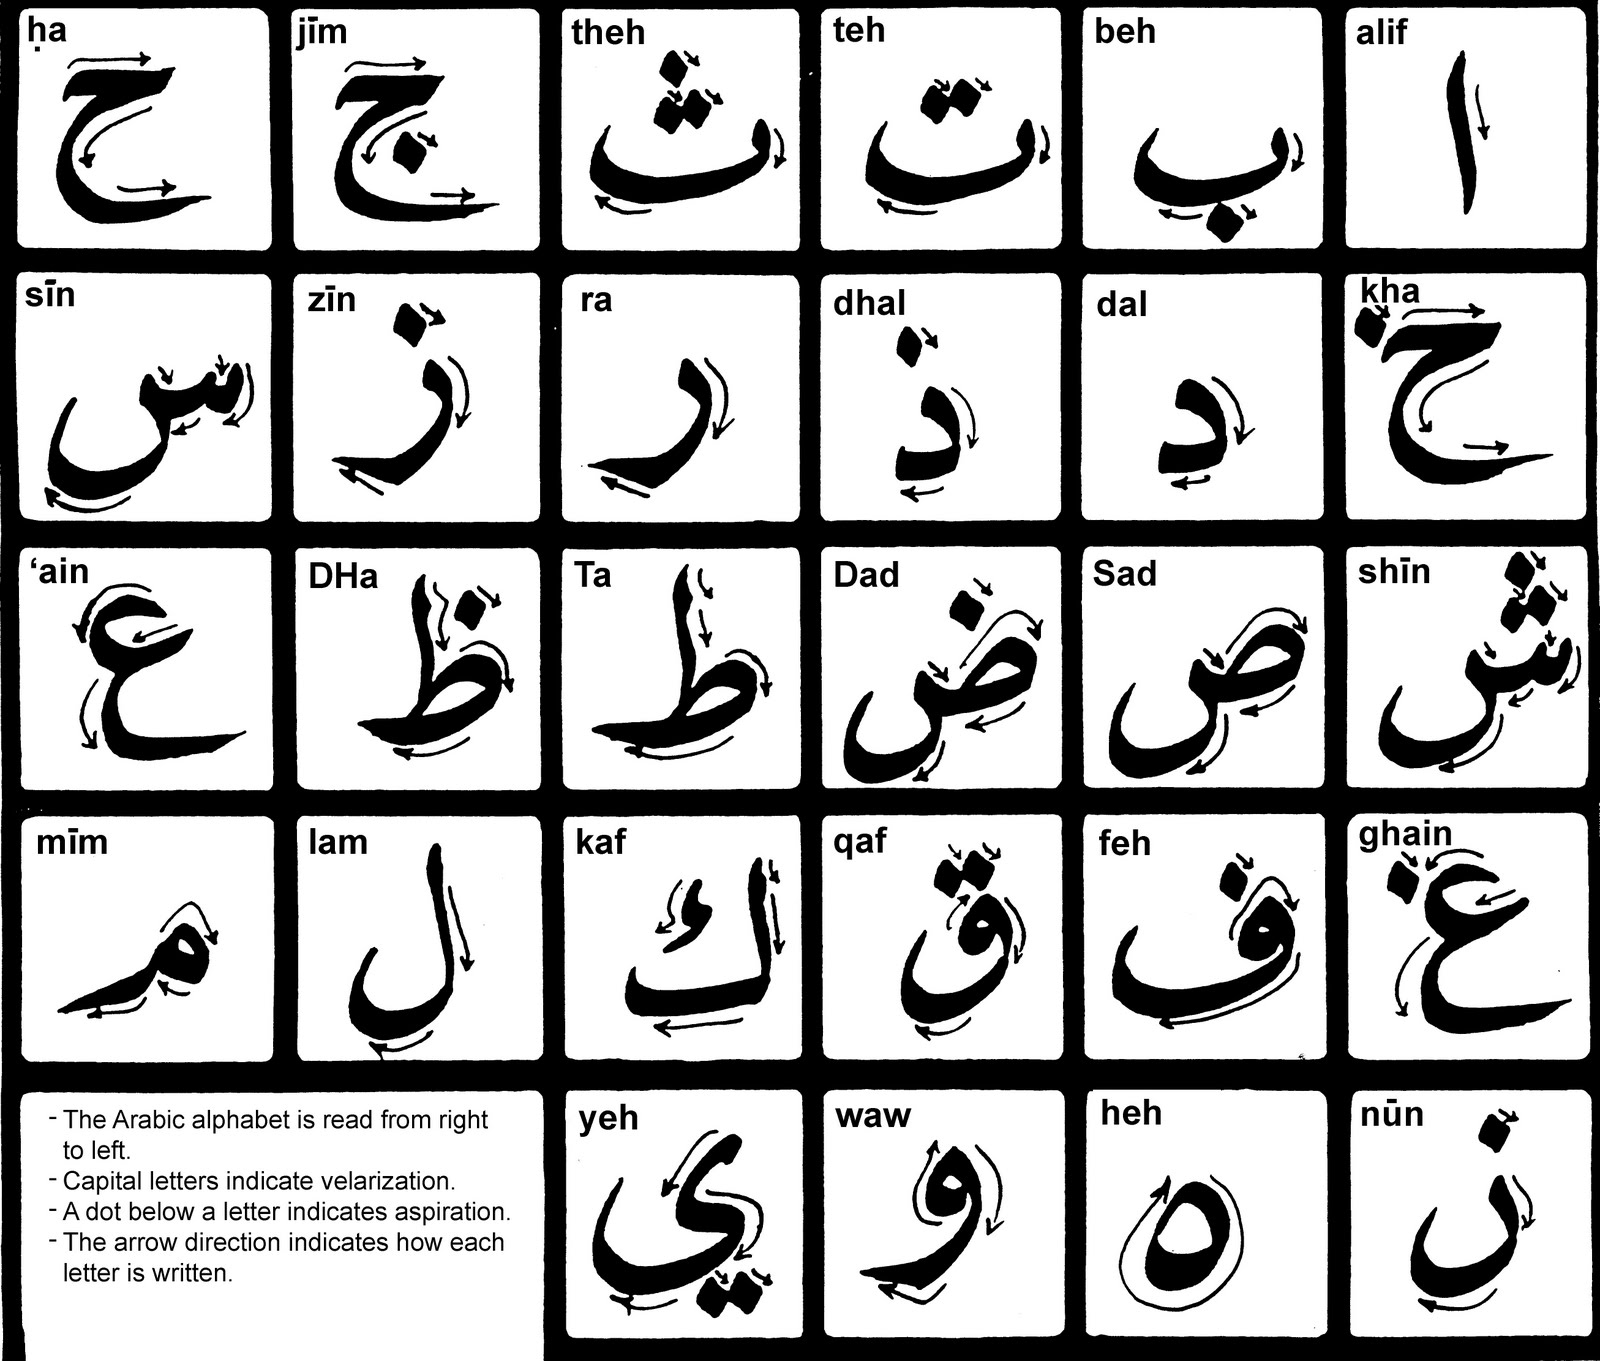 Arabic Alphabet Letters in English